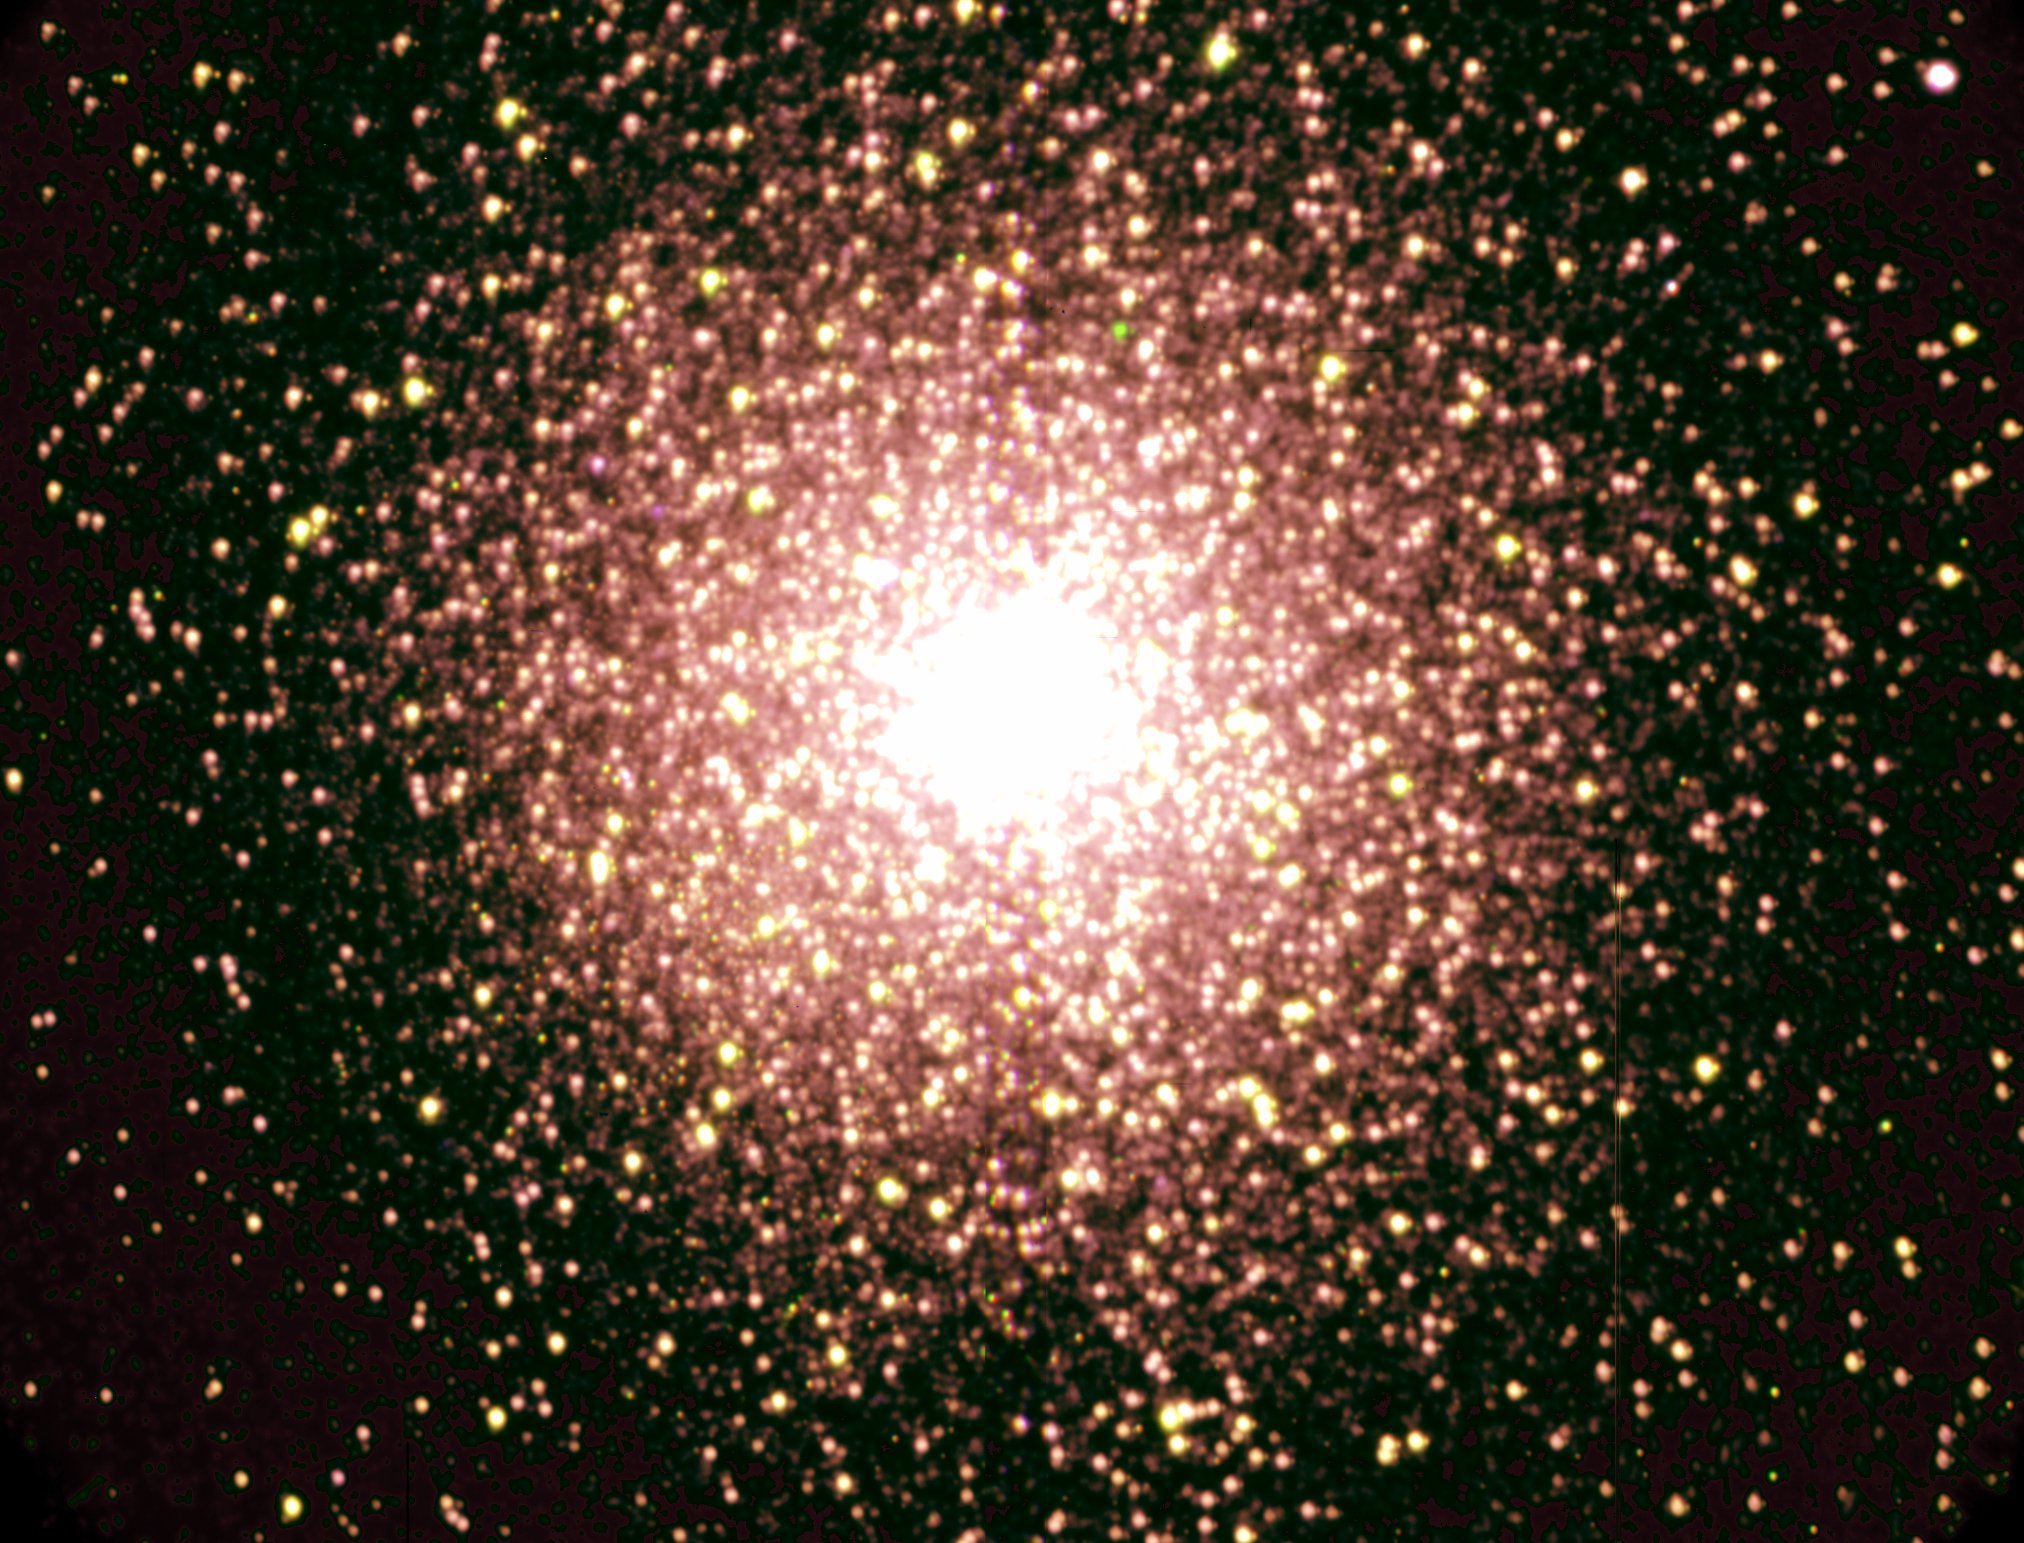 Star clusters might host intelligent civilizations, claims study